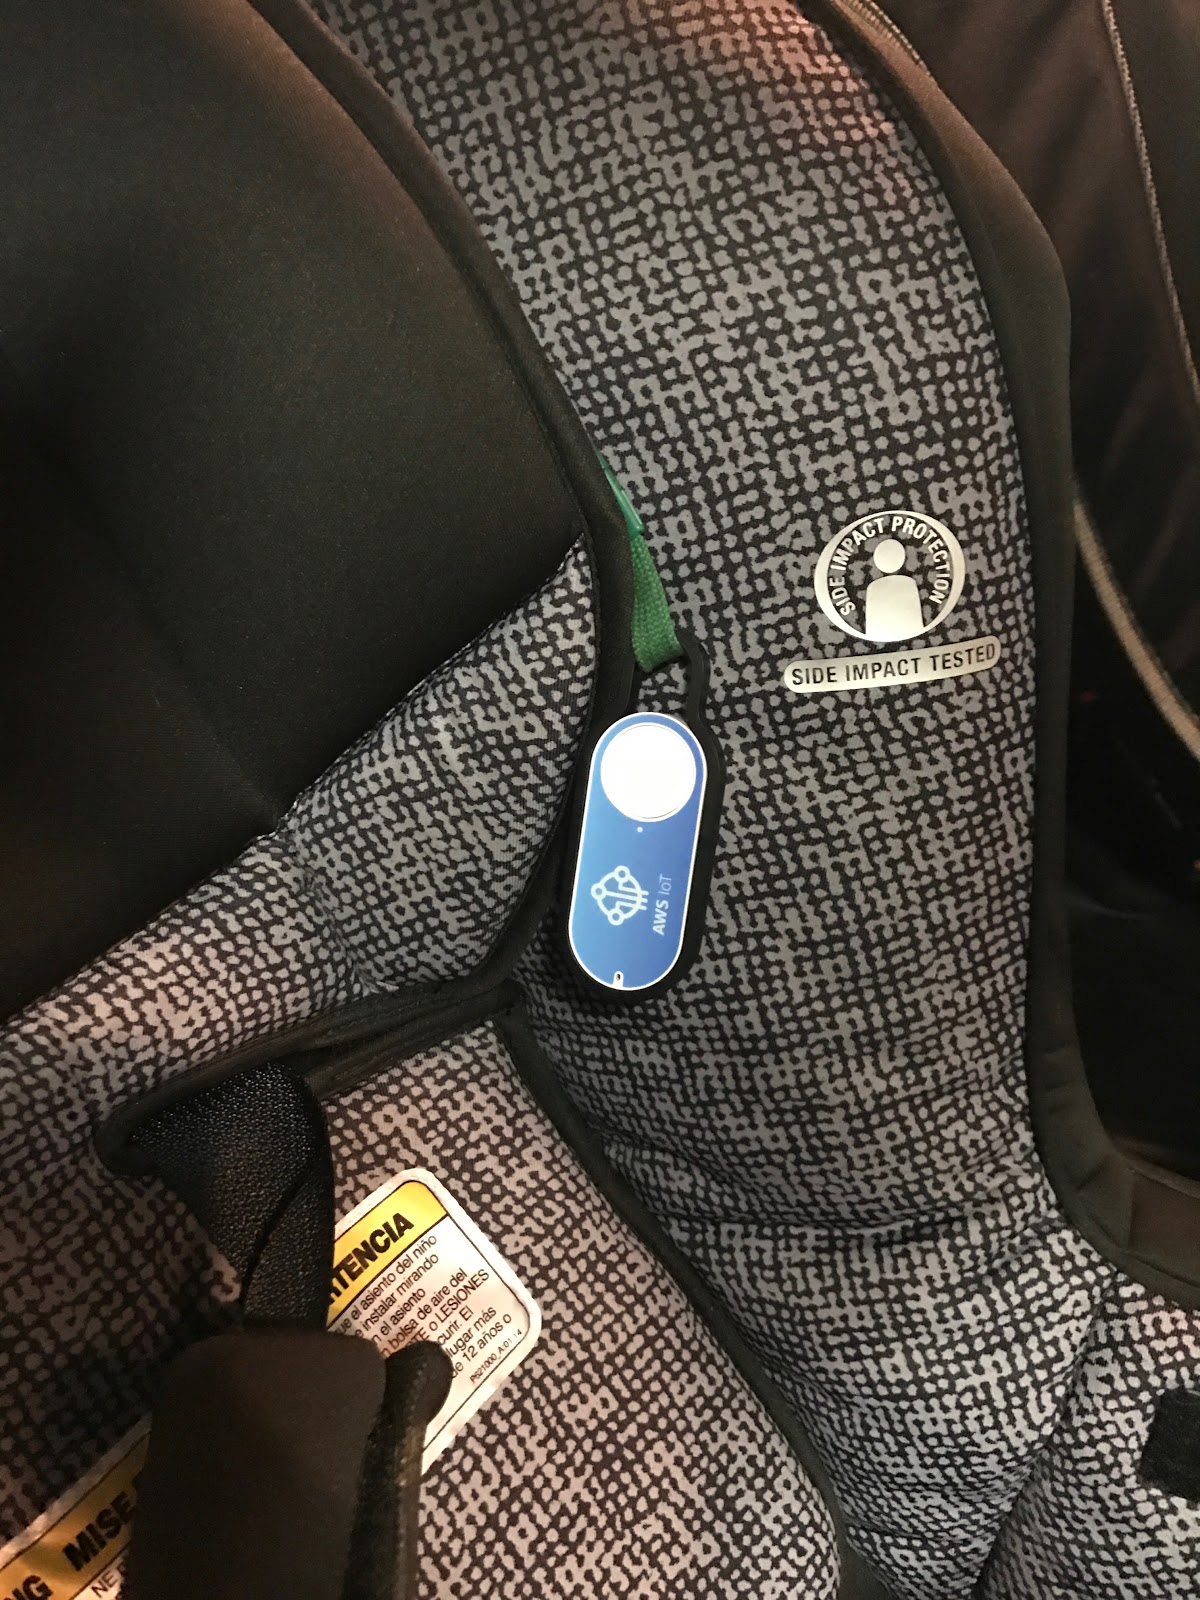 Picture of AWS IoT lifeline Help Button attached to carseat